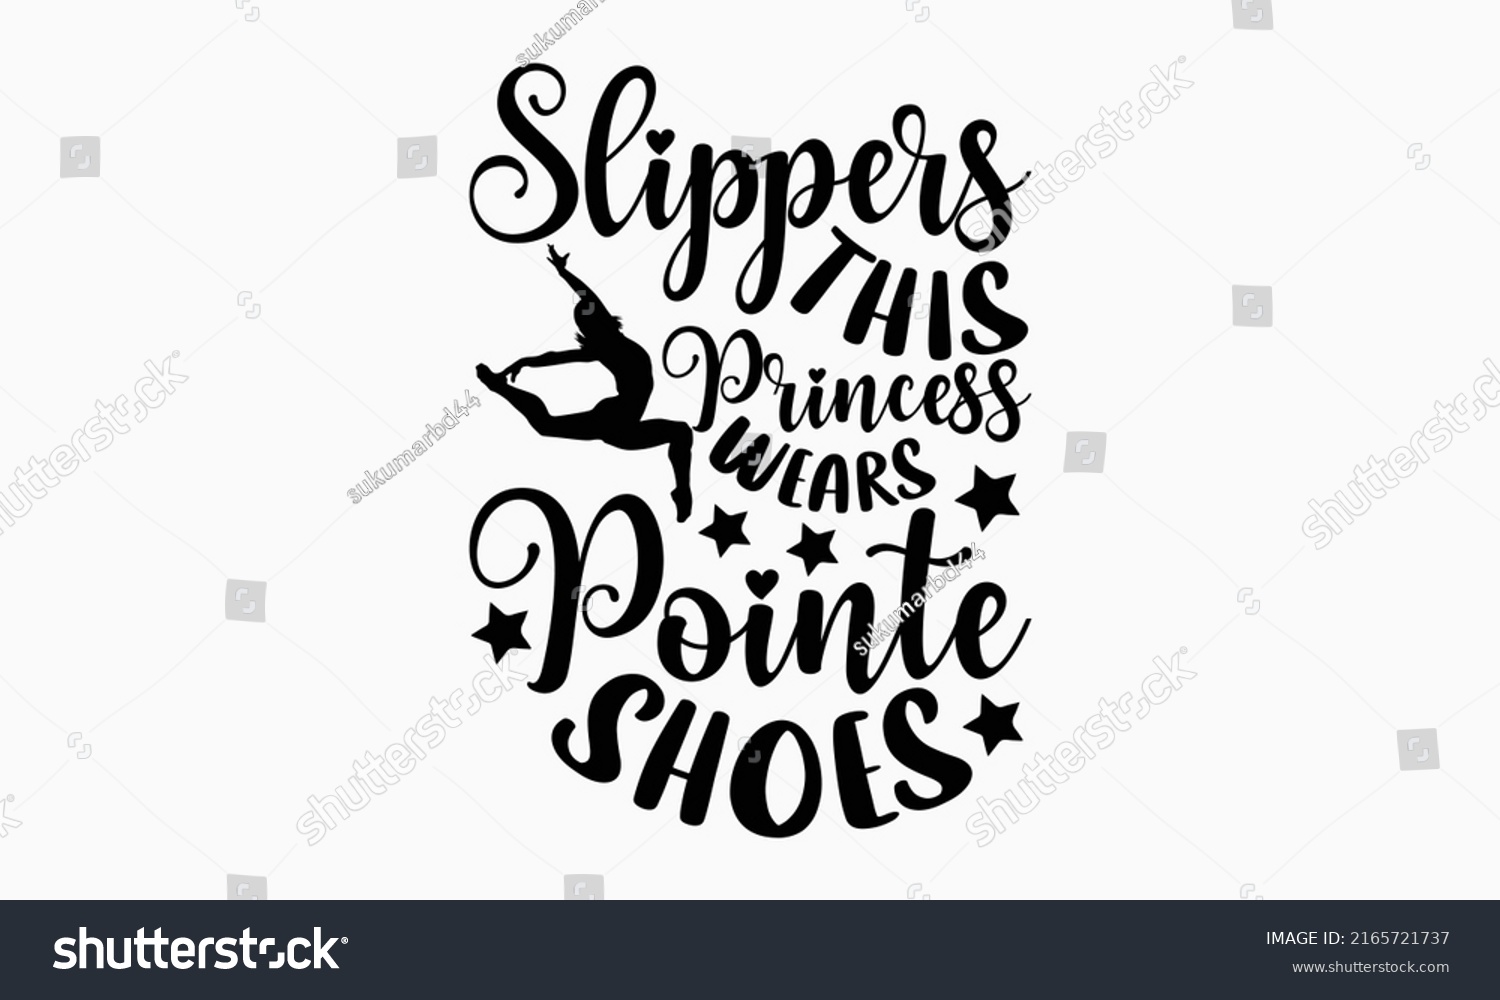 SVG of Slippers this princess wears pointe shoes - Ballet t shirt design, SVG Files for Cutting, Handmade calligraphy vector illustration, Hand written vector sign, EPS svg